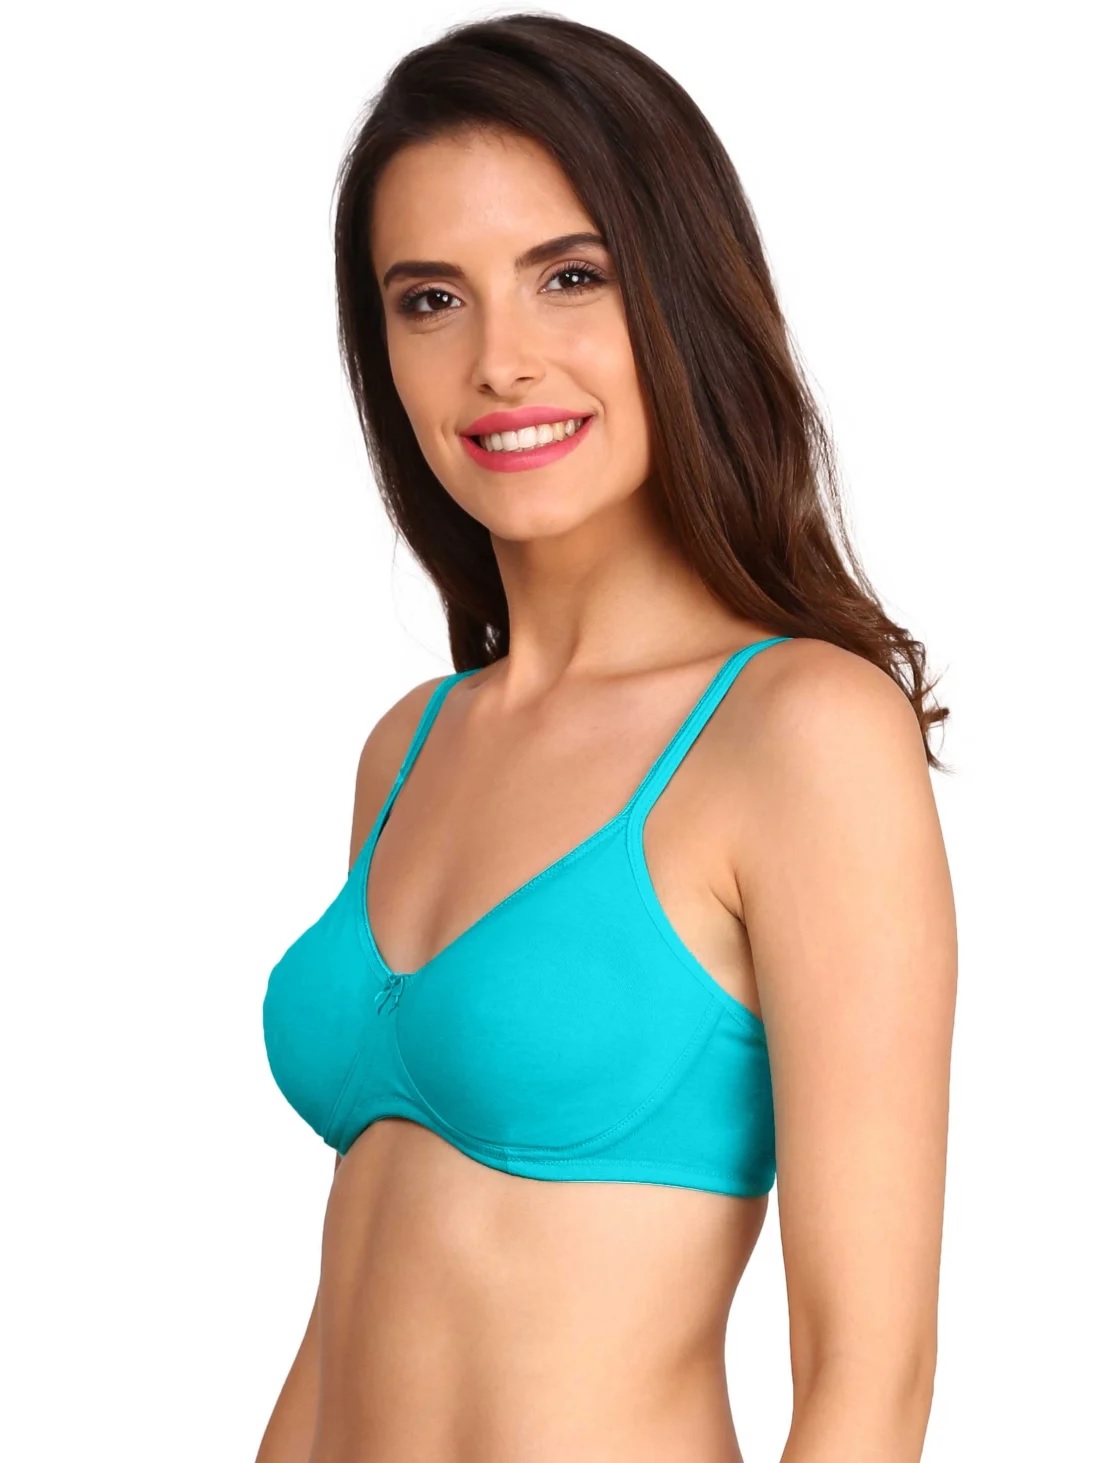 KTM Retails - Jockey#Women's InnerWears - - - - - - - - - - DESCRIPTION: -  Available in attractive shades Product:Core Color Seamless Shaper Bra  Price: Nrs 995 Style:1722 - - - - - - - - - - - KTM Retails Contact us for  home delivery: 4233312